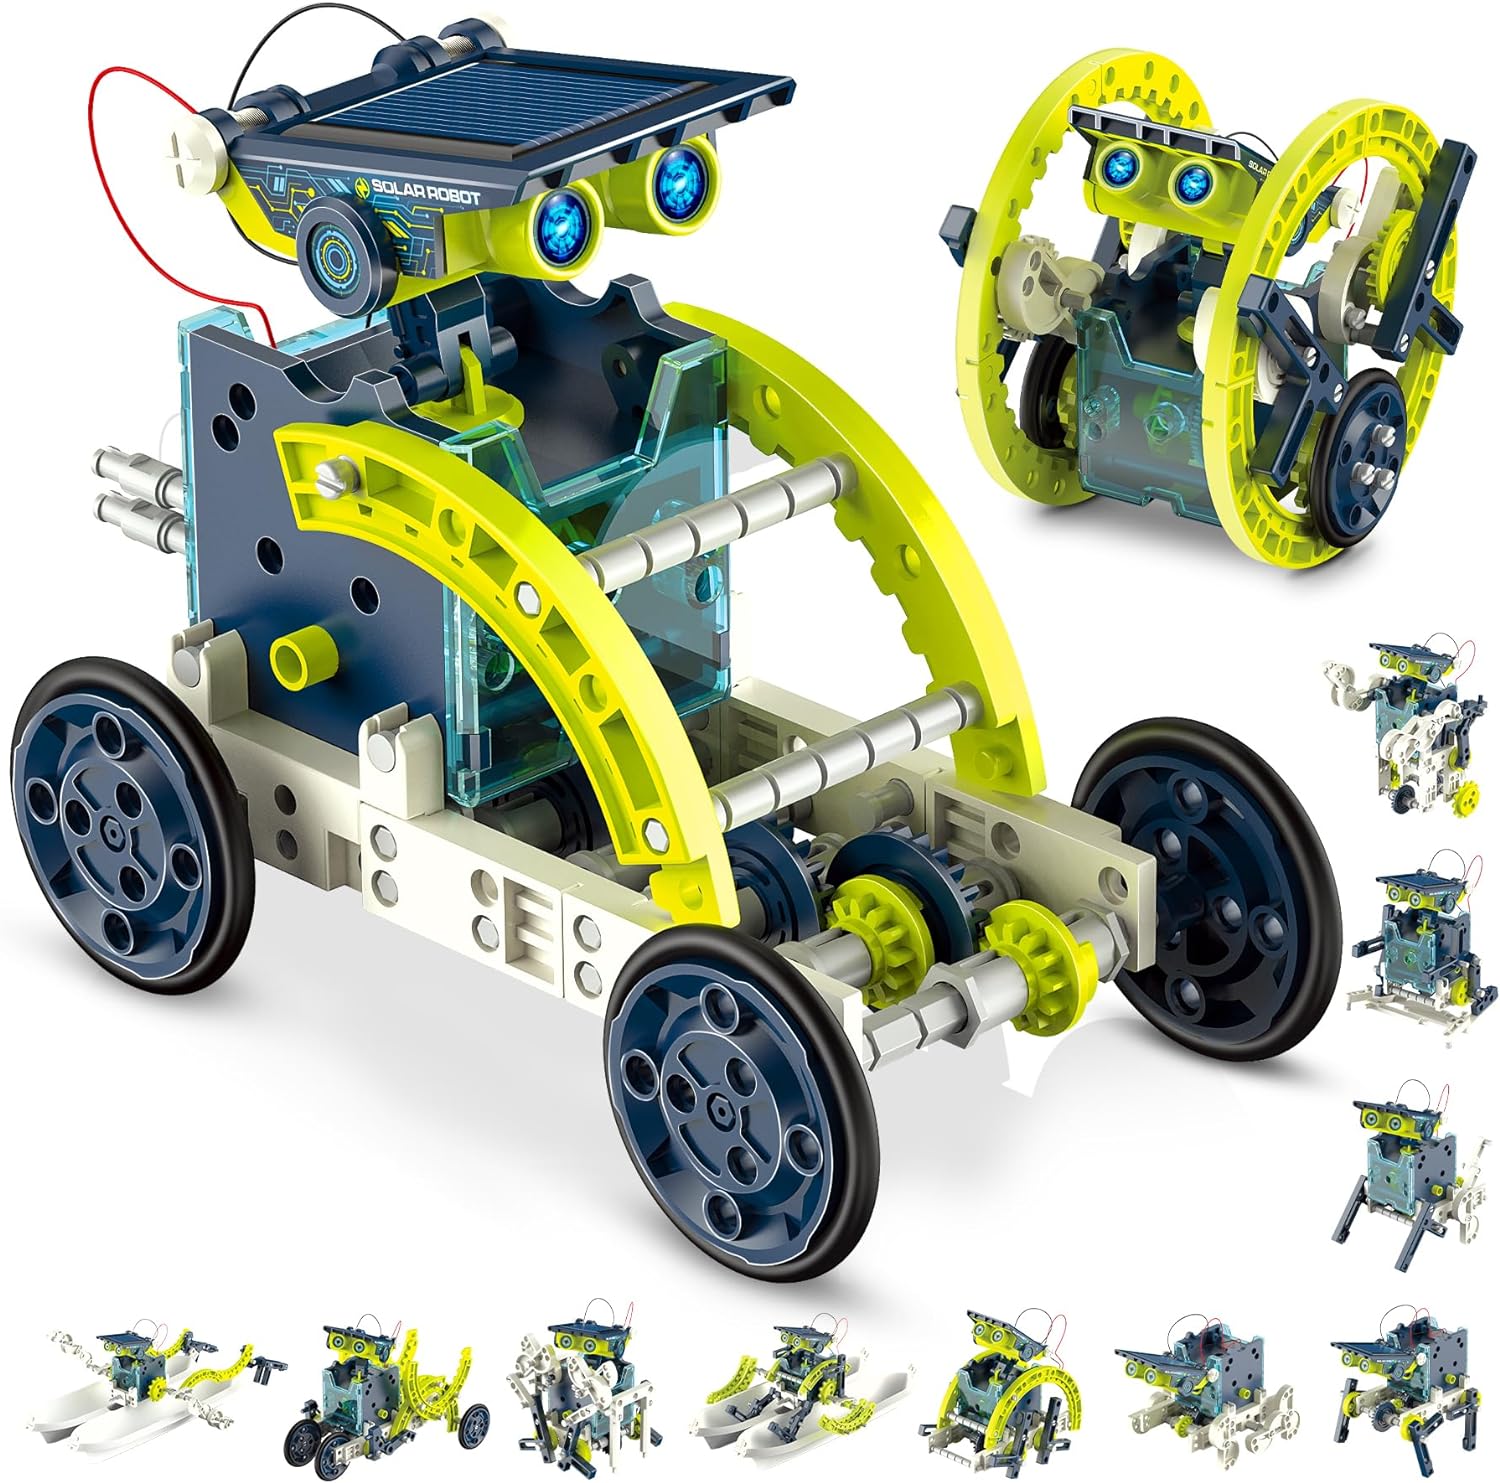 Hot Bee 12-in-1 STEM Solar Robot Kit - STEM Projects for Kids Ages 8-12, Learning Educational Science Kits, DIY Building Toys, Birthday for 8 9 10 11 12 13 Year Old Boys Girls